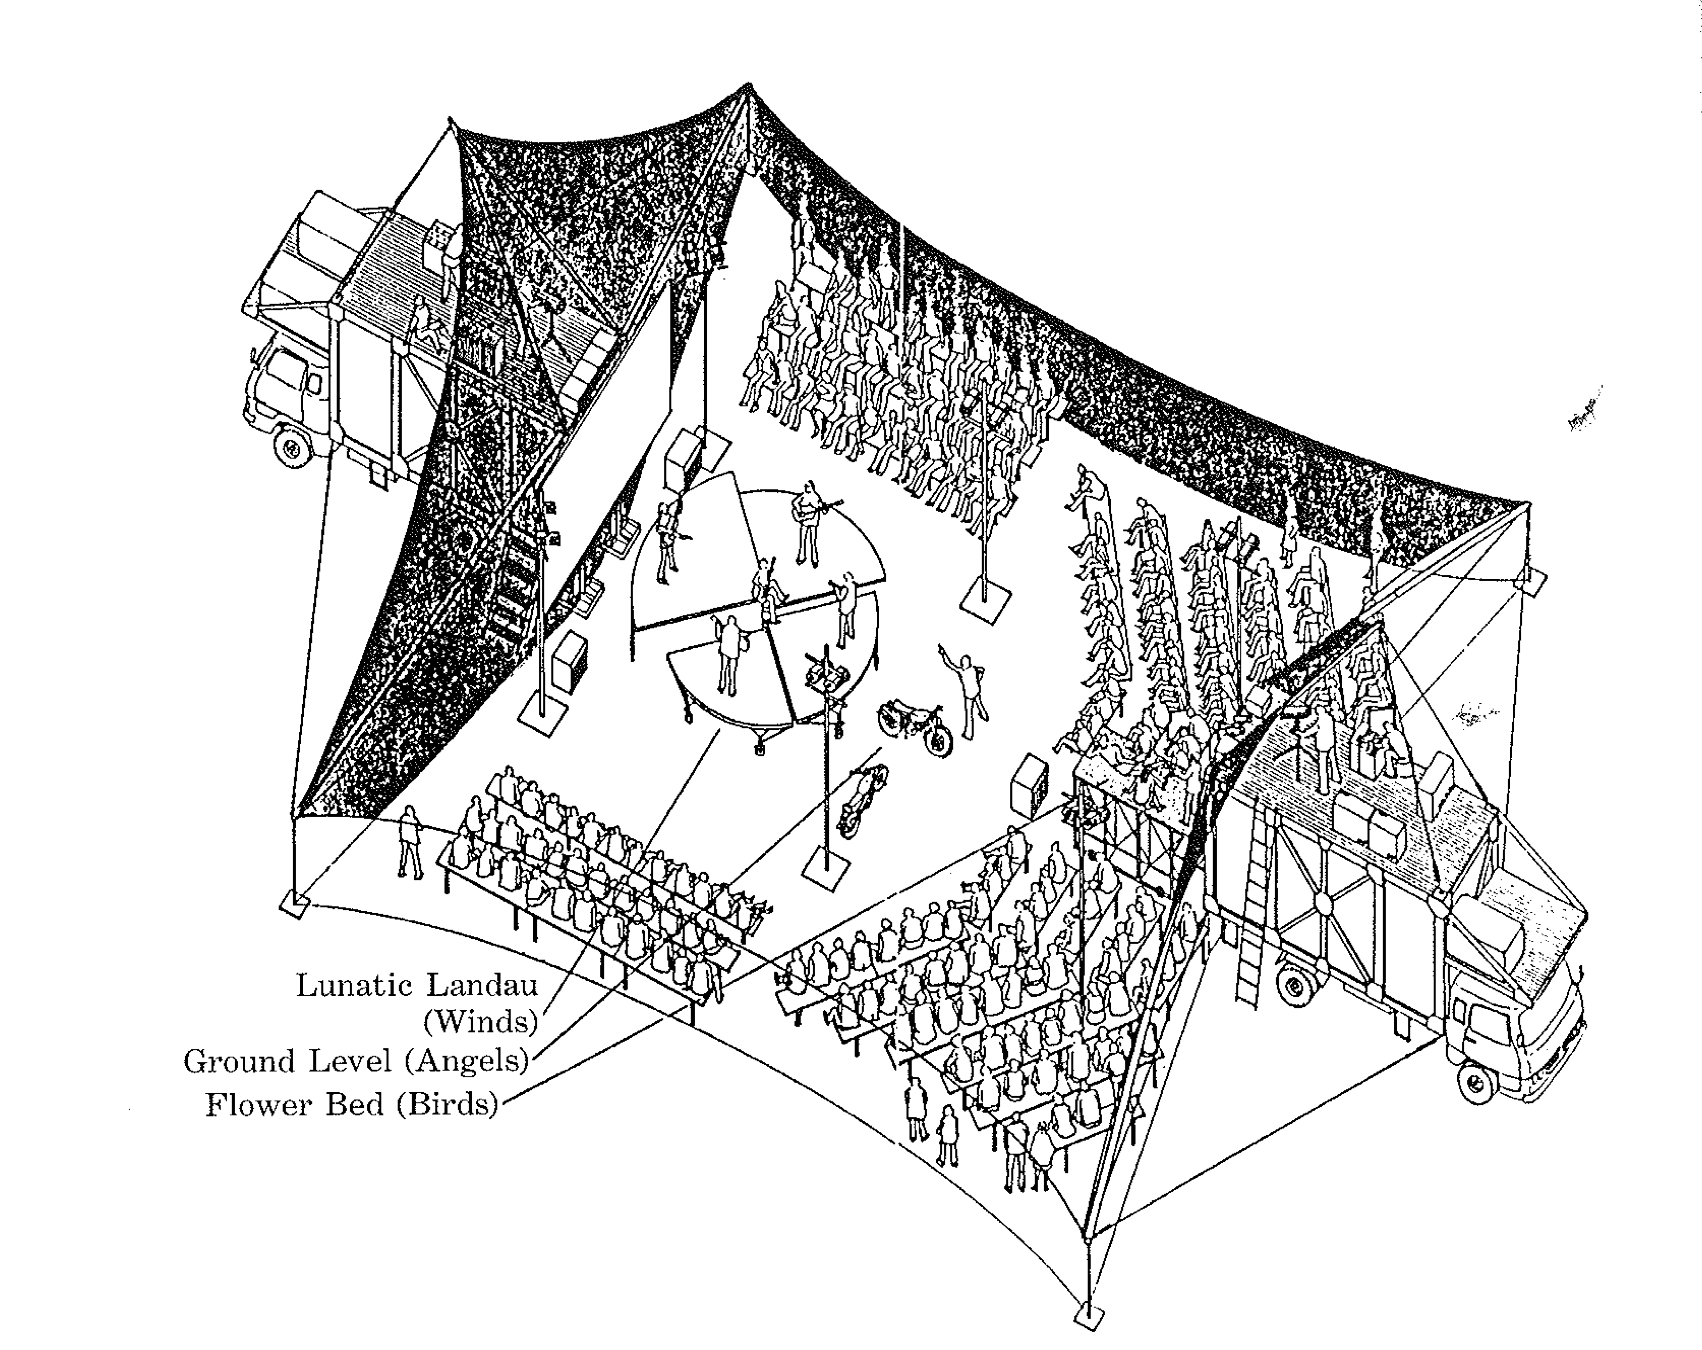 Figure 3: The Dance of Angels who burn Their Own Wings: The Black Tent Theatre as it was arranged for the 1970 procuction (in Goodman, David G. Japanese Drama and Culture in the 1960s: The Return of the Gods. Sharpe, 1988, 290).